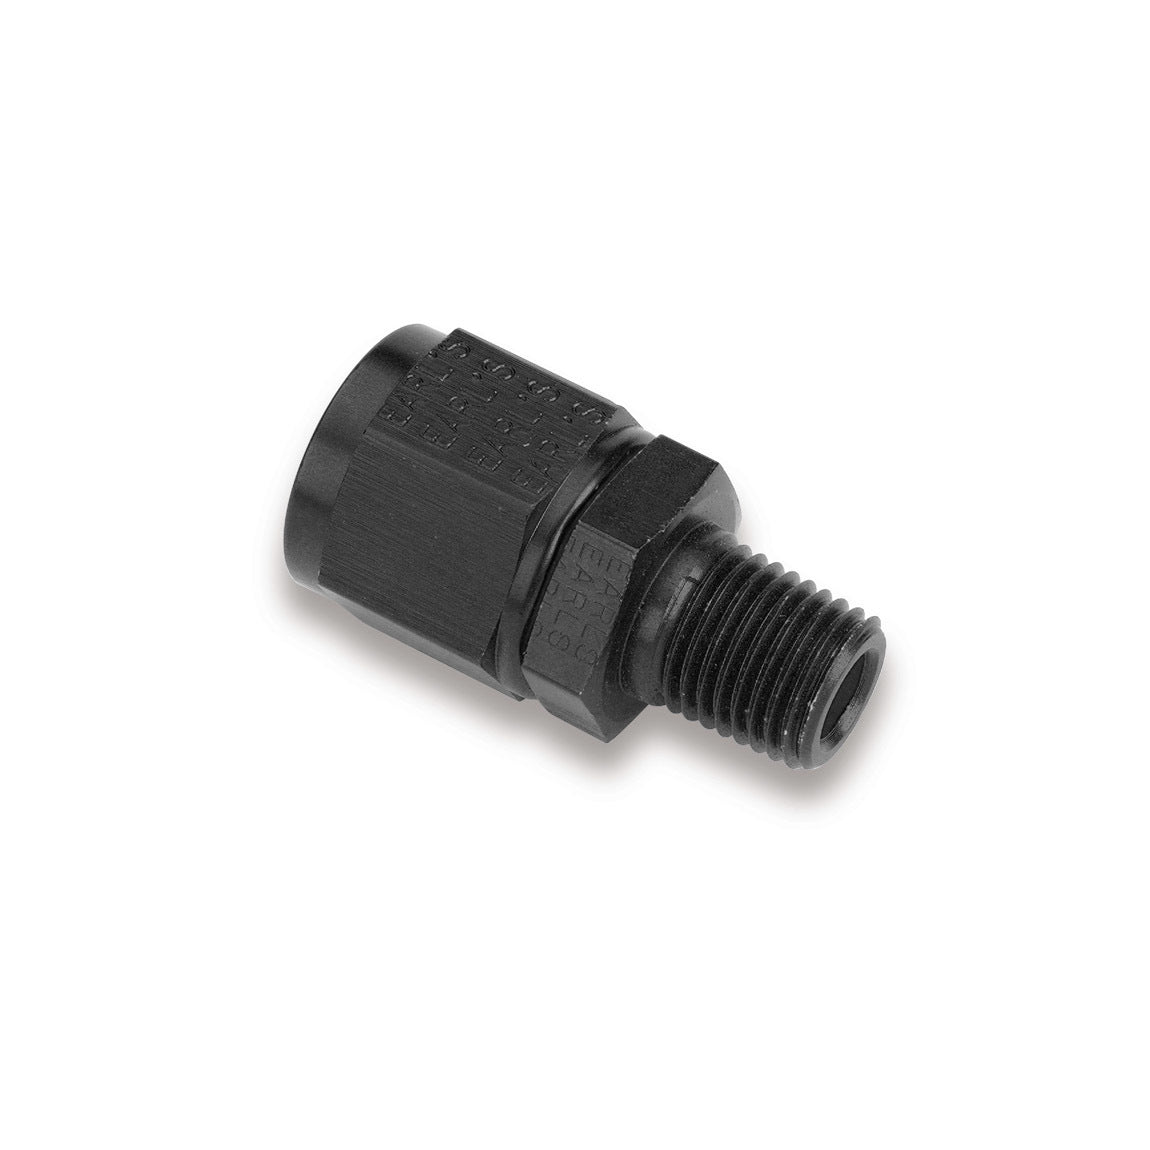 Adapter Fitting 8an Fem Swivel to Male 3/8 NPT